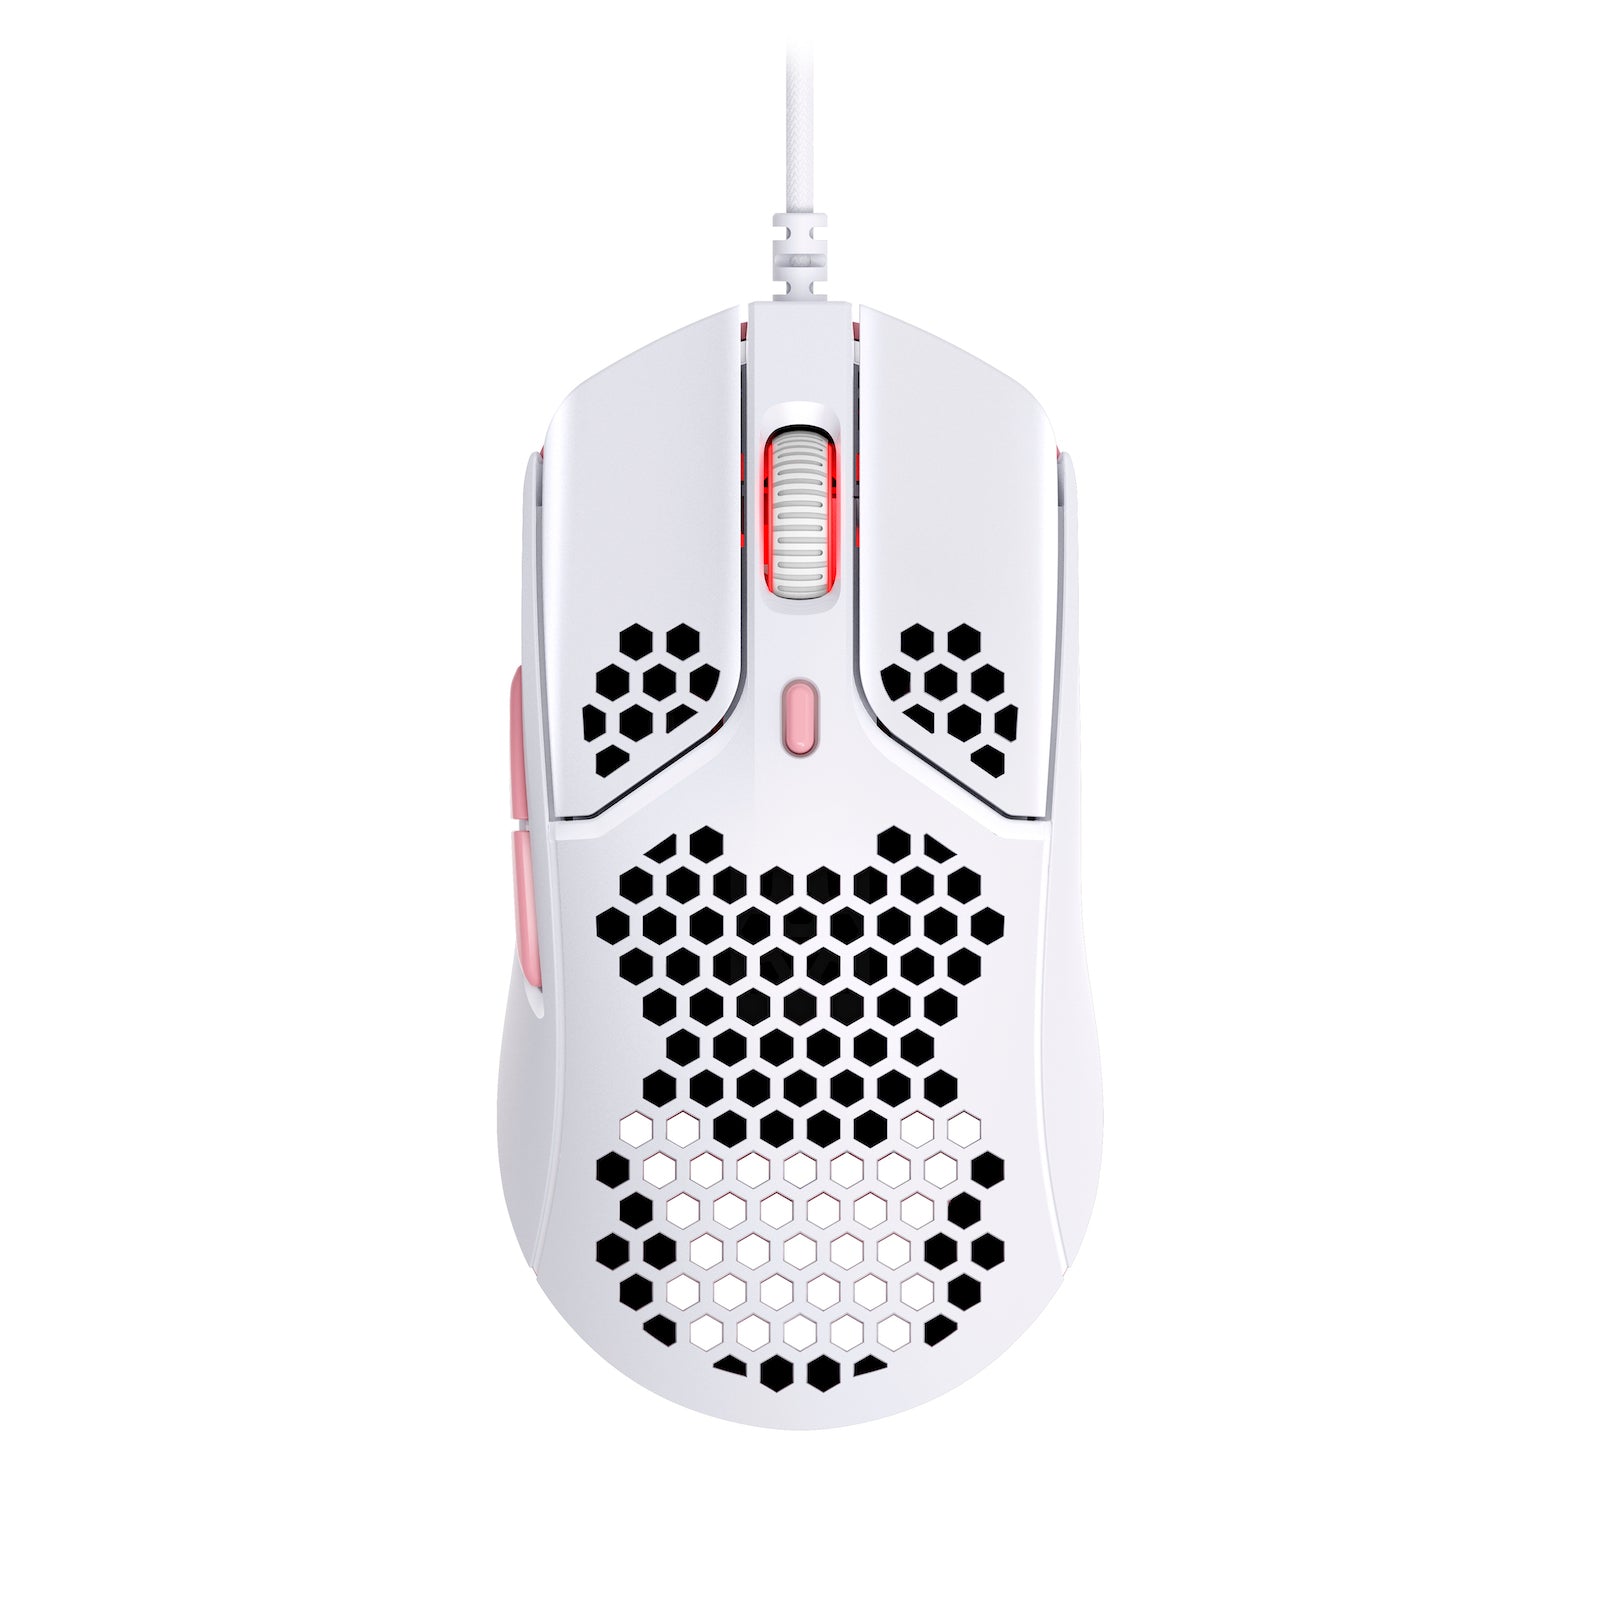 HyperX Pulsefire Haste White-Pink Gaming Mouse - view from above